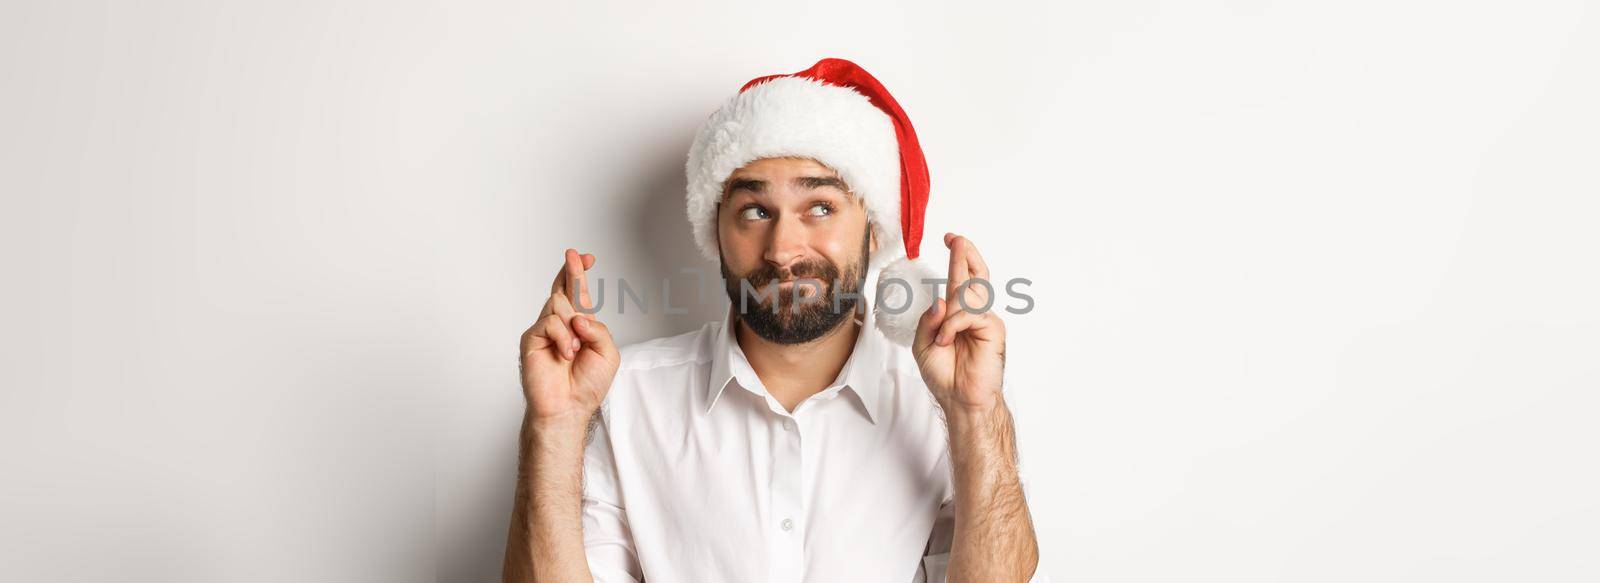 Party, winter holidays and celebration concept. Happy man in santa hat making christmas wish, cross fingers for good luck and looking hopeful at upper left corner.